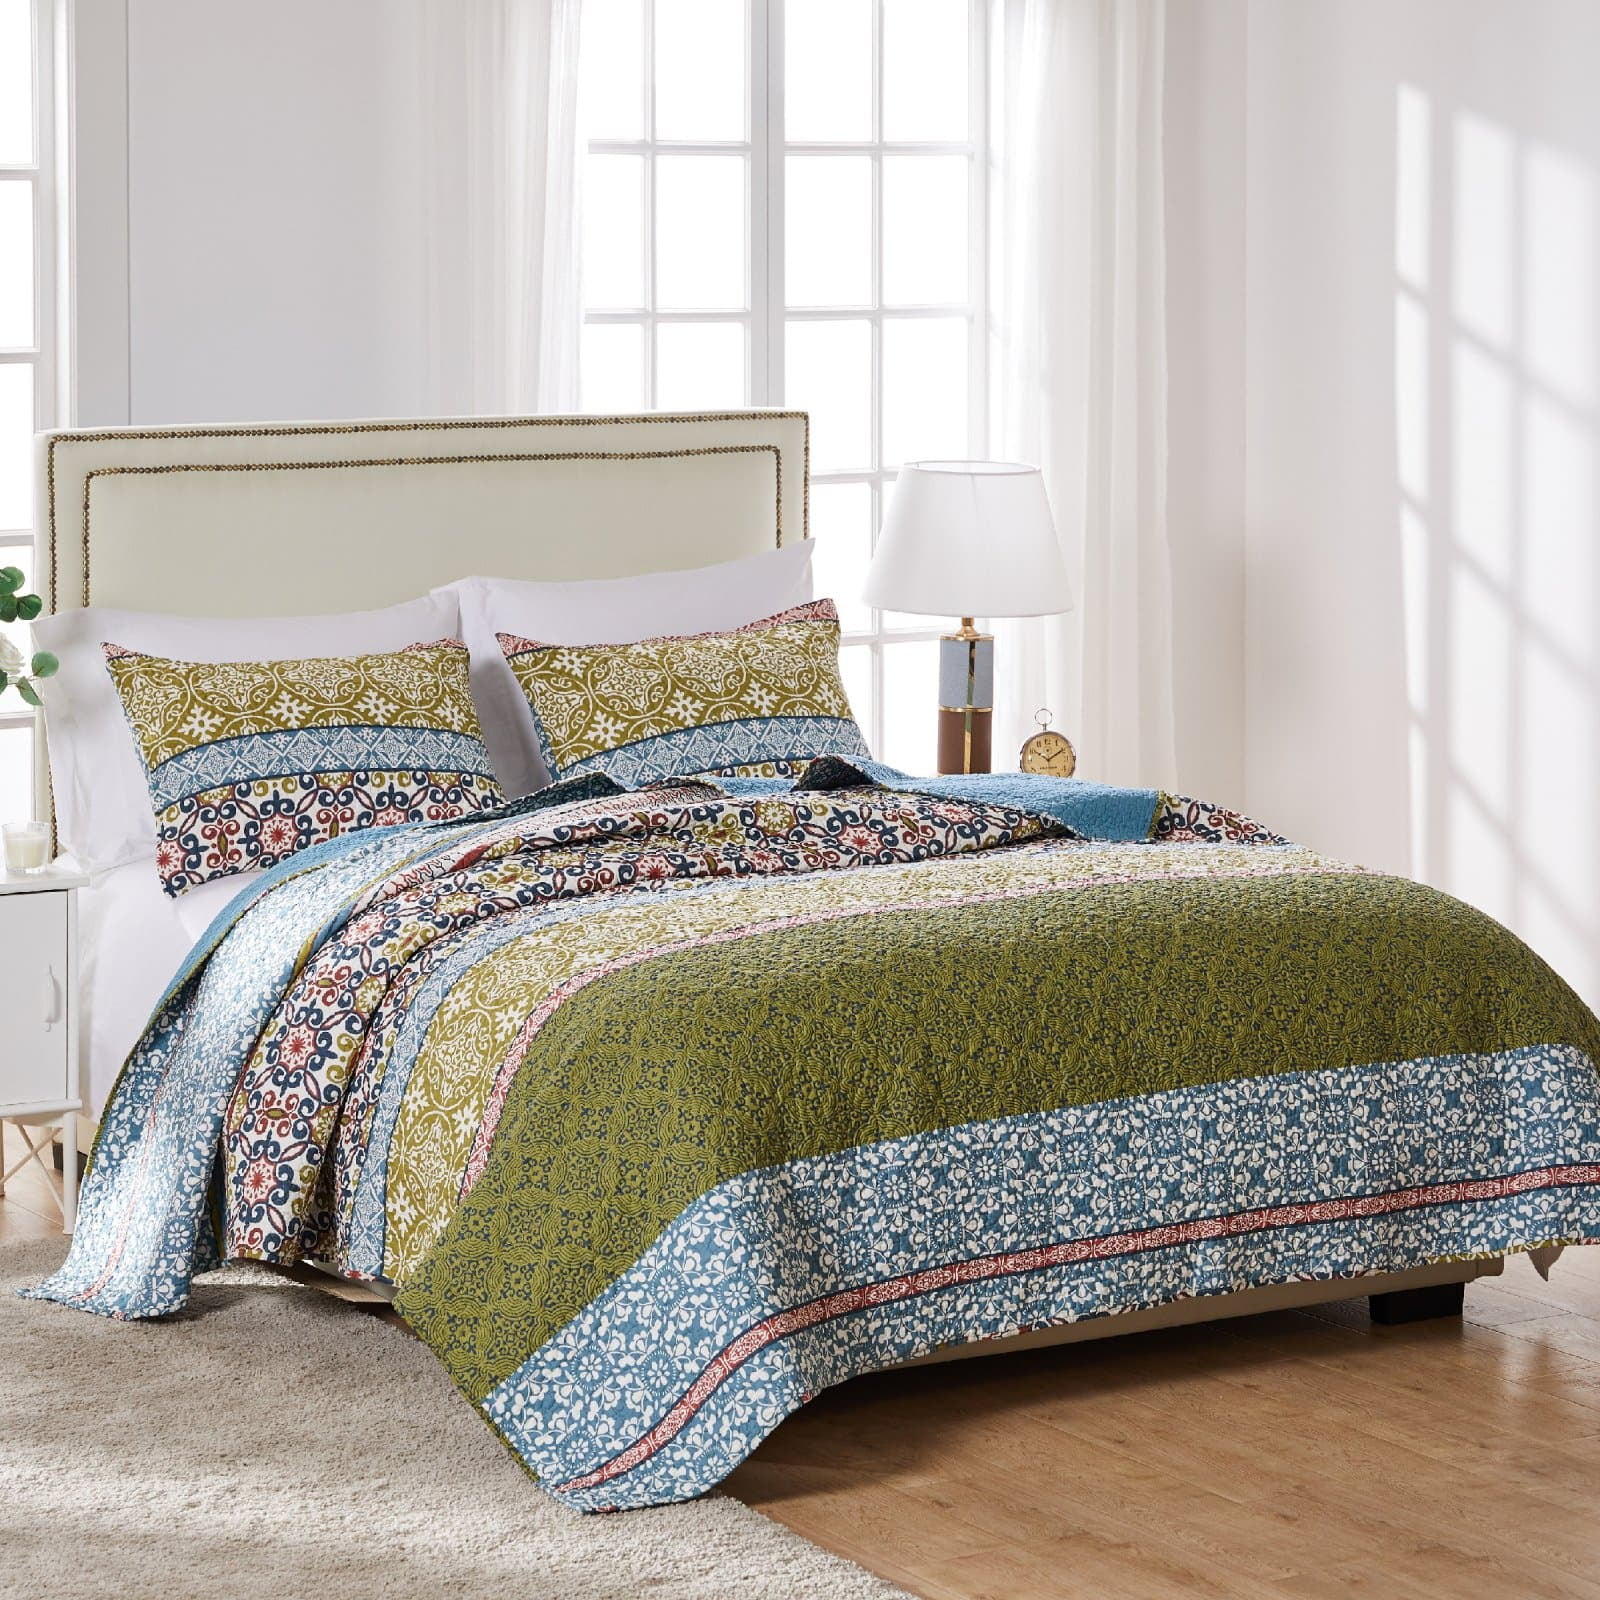 Details about   Greenland Home Fashions Marley Oversized Cotton 3-piece 